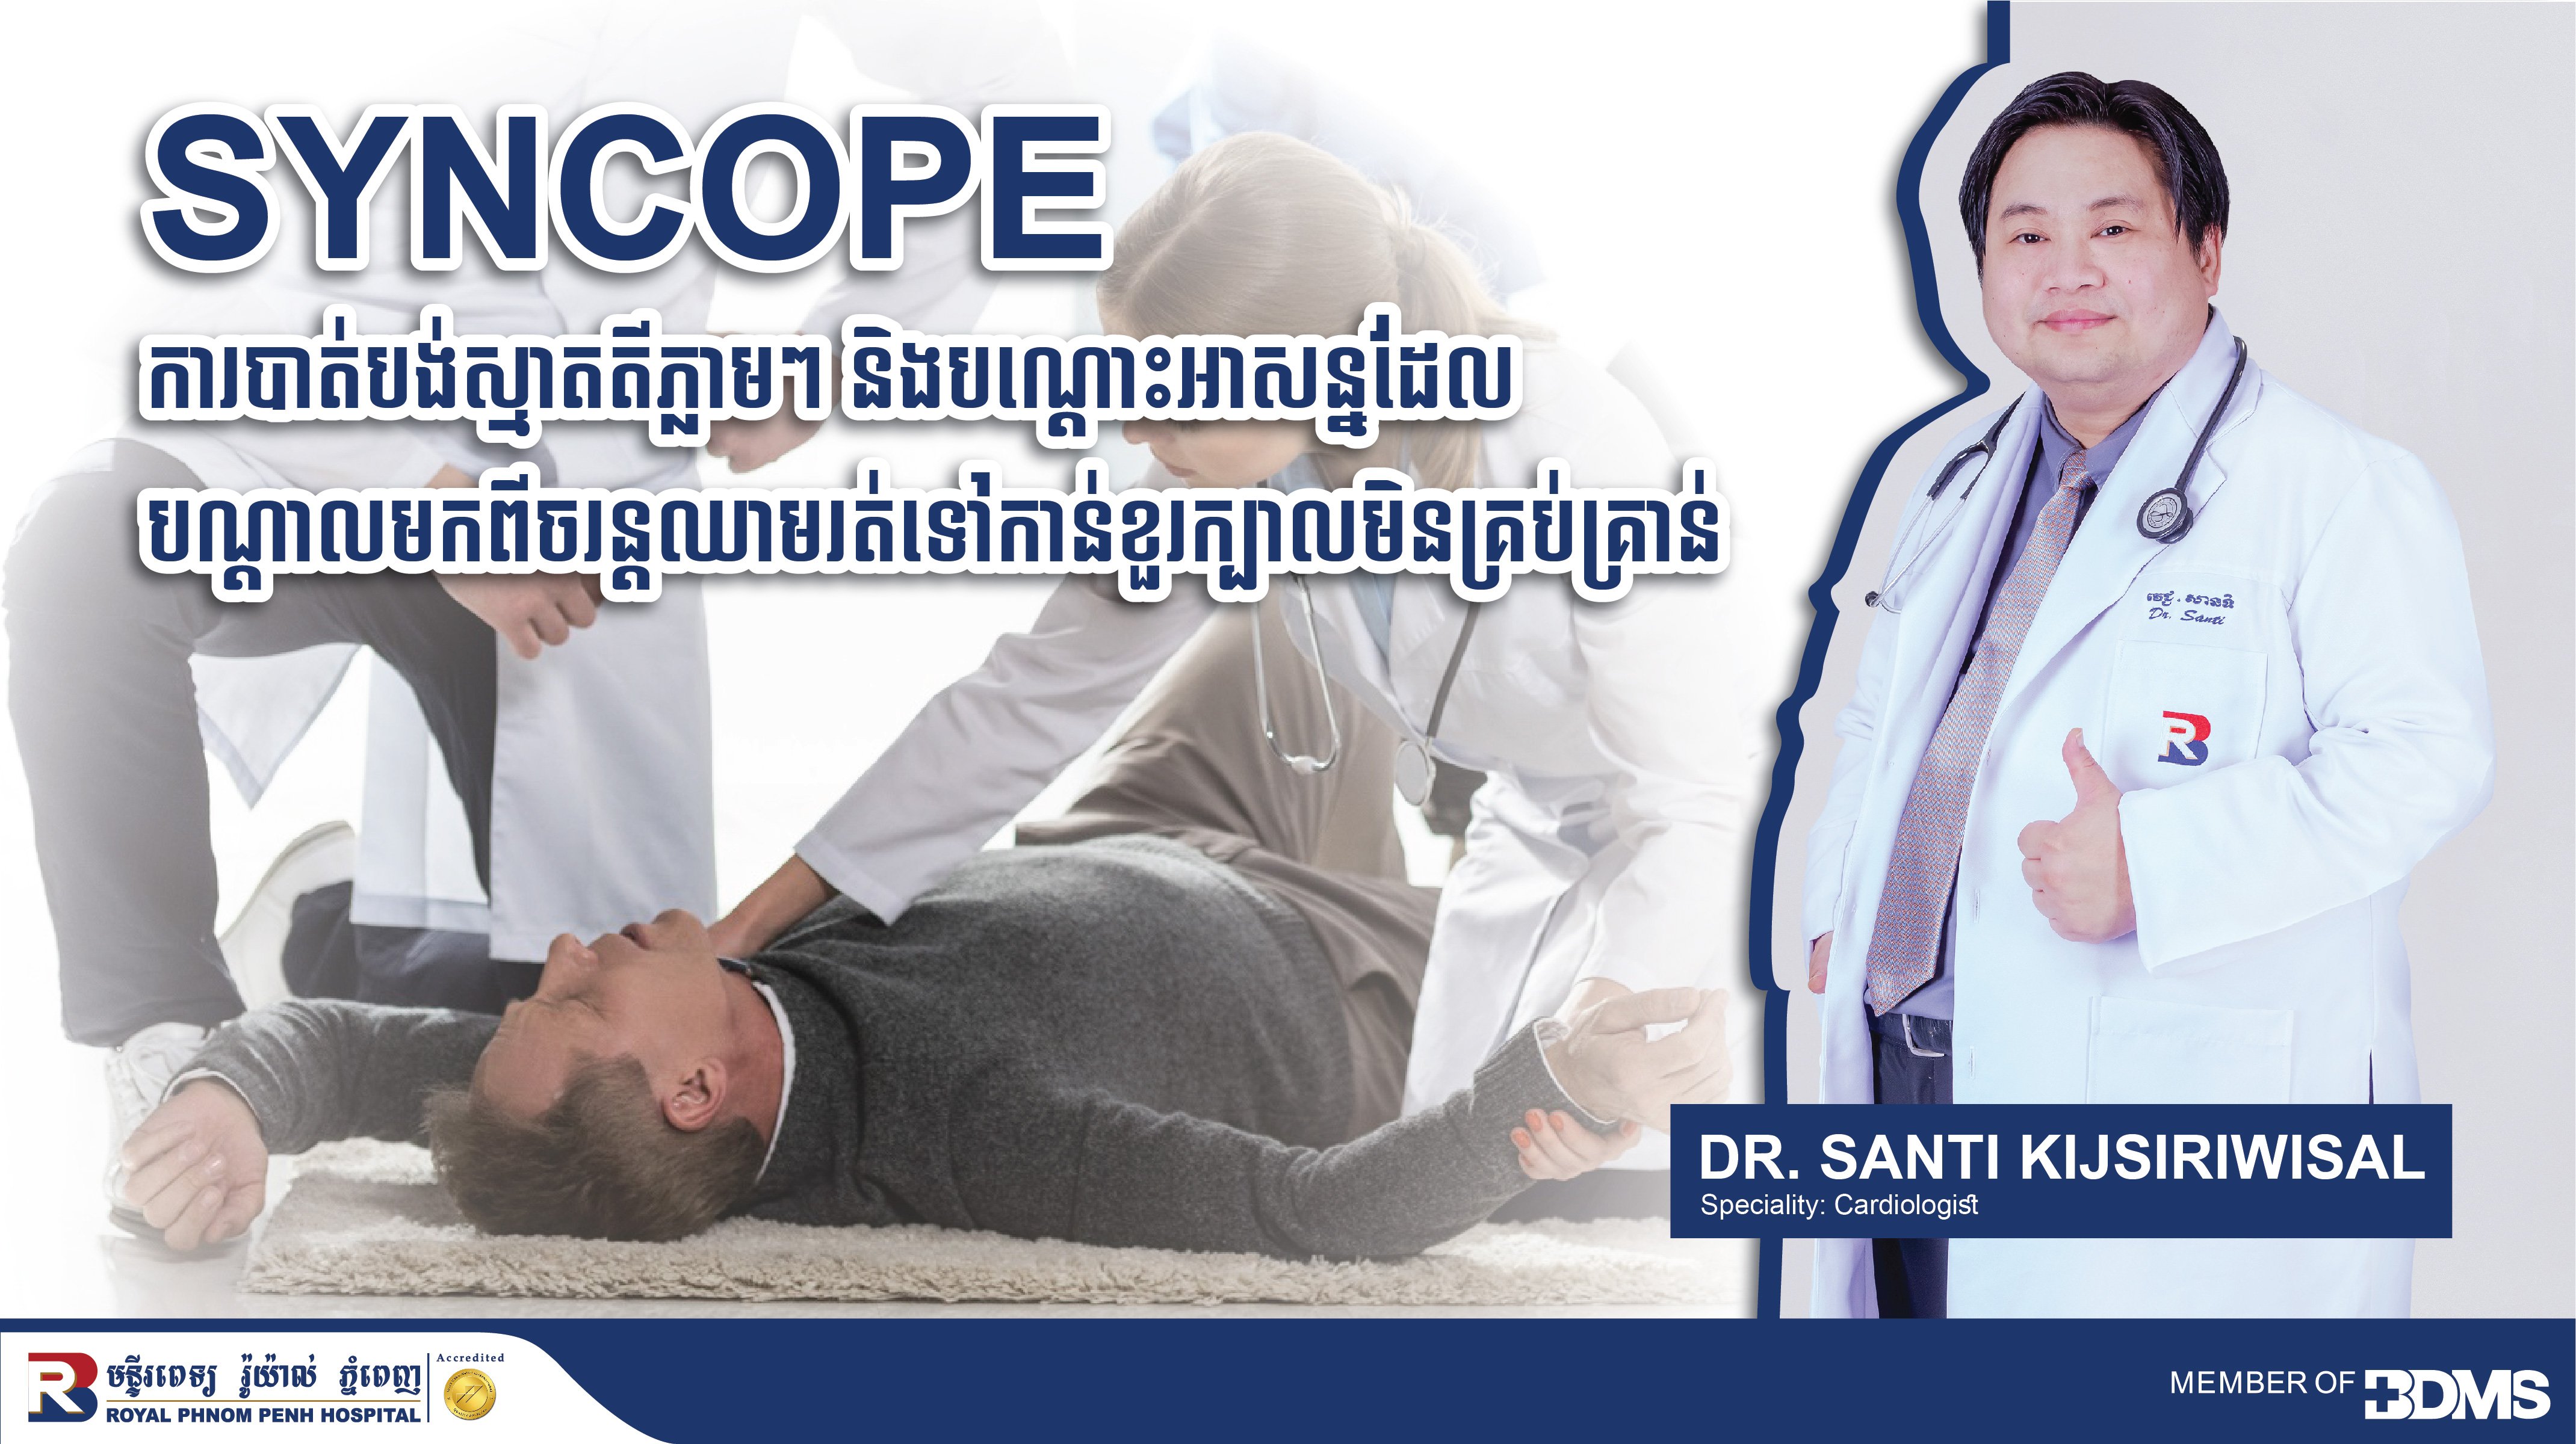 Syncope is a sudden and transient blackout caused by insufficient blood flow to the brain